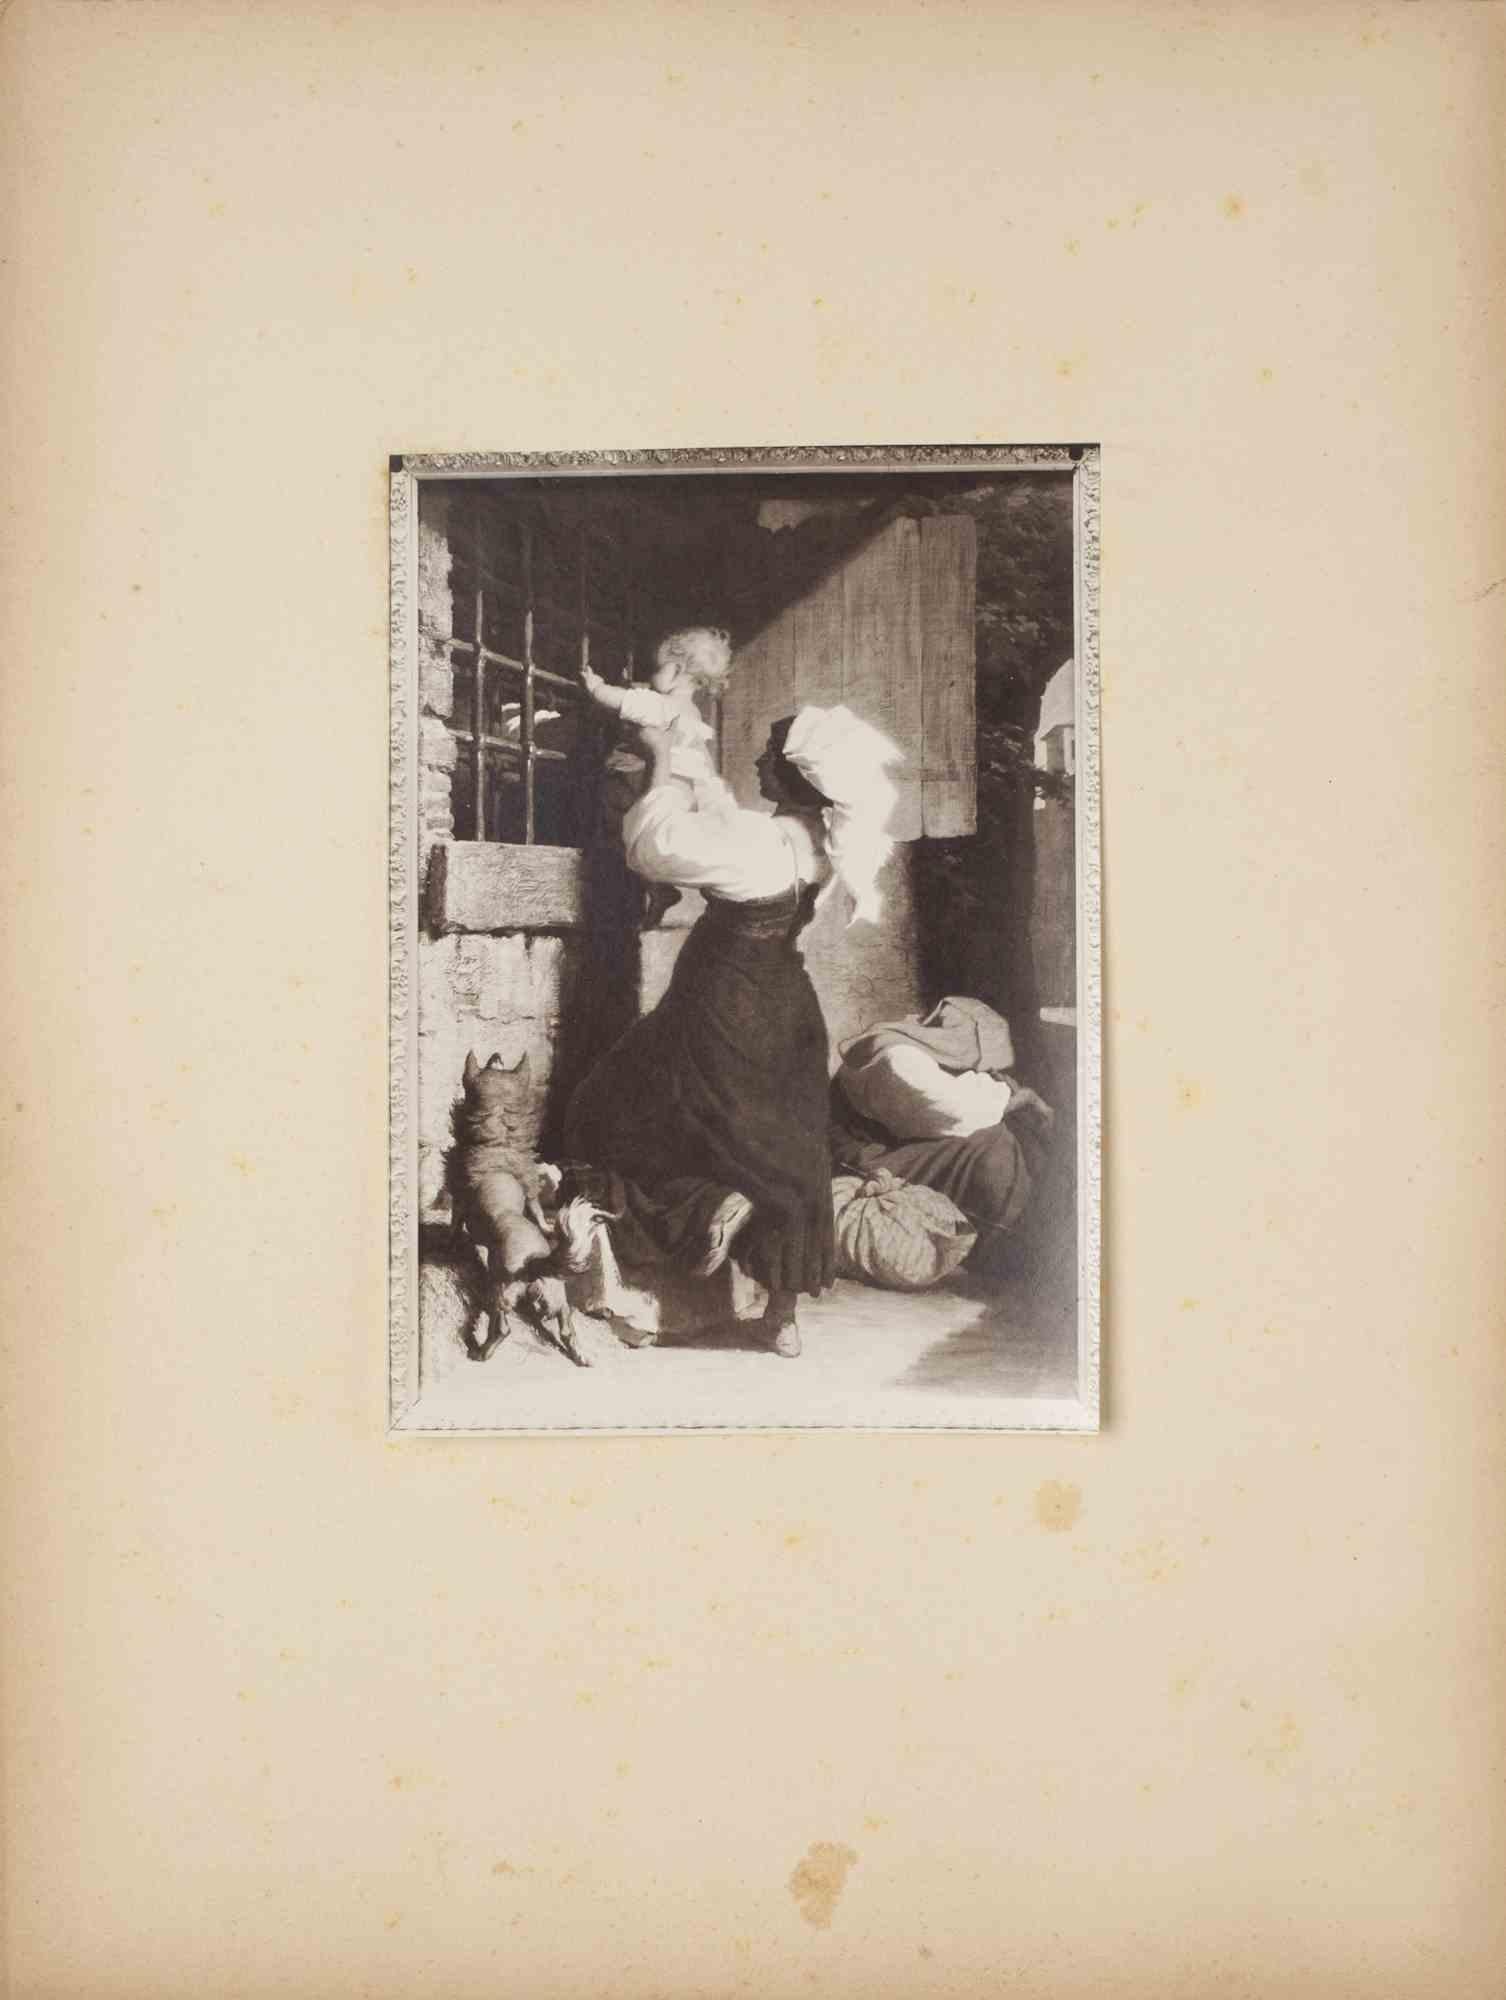 Unknown Figurative Photograph - Mother and Child - Vintage Photograph - 1930s